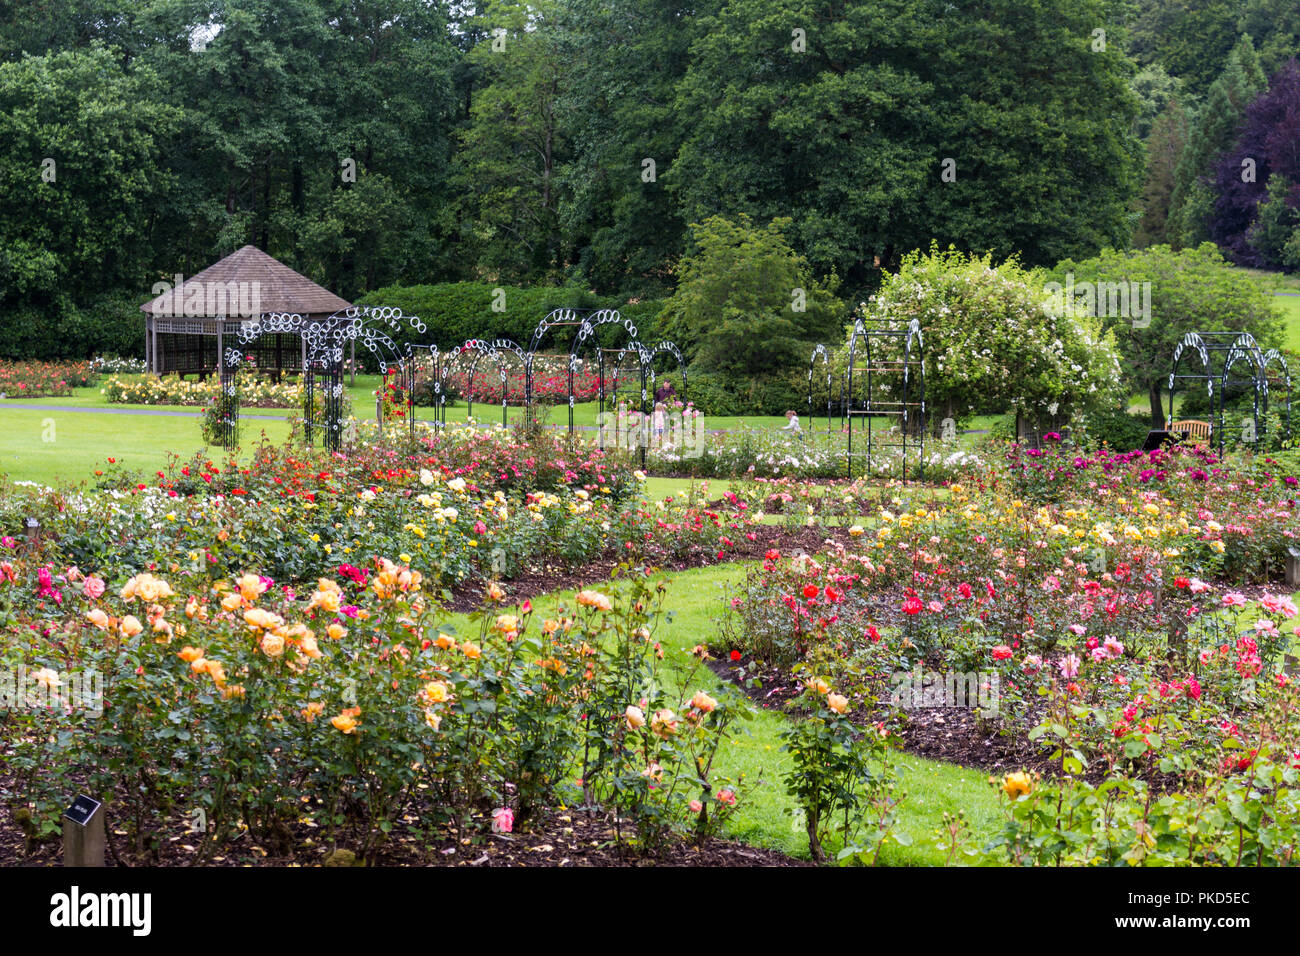 Flower beds and trellis. Taken during Rose Week at Sir Thomas and Lady Dixon Park, South Belfast, N.Ireland. Stock Photo